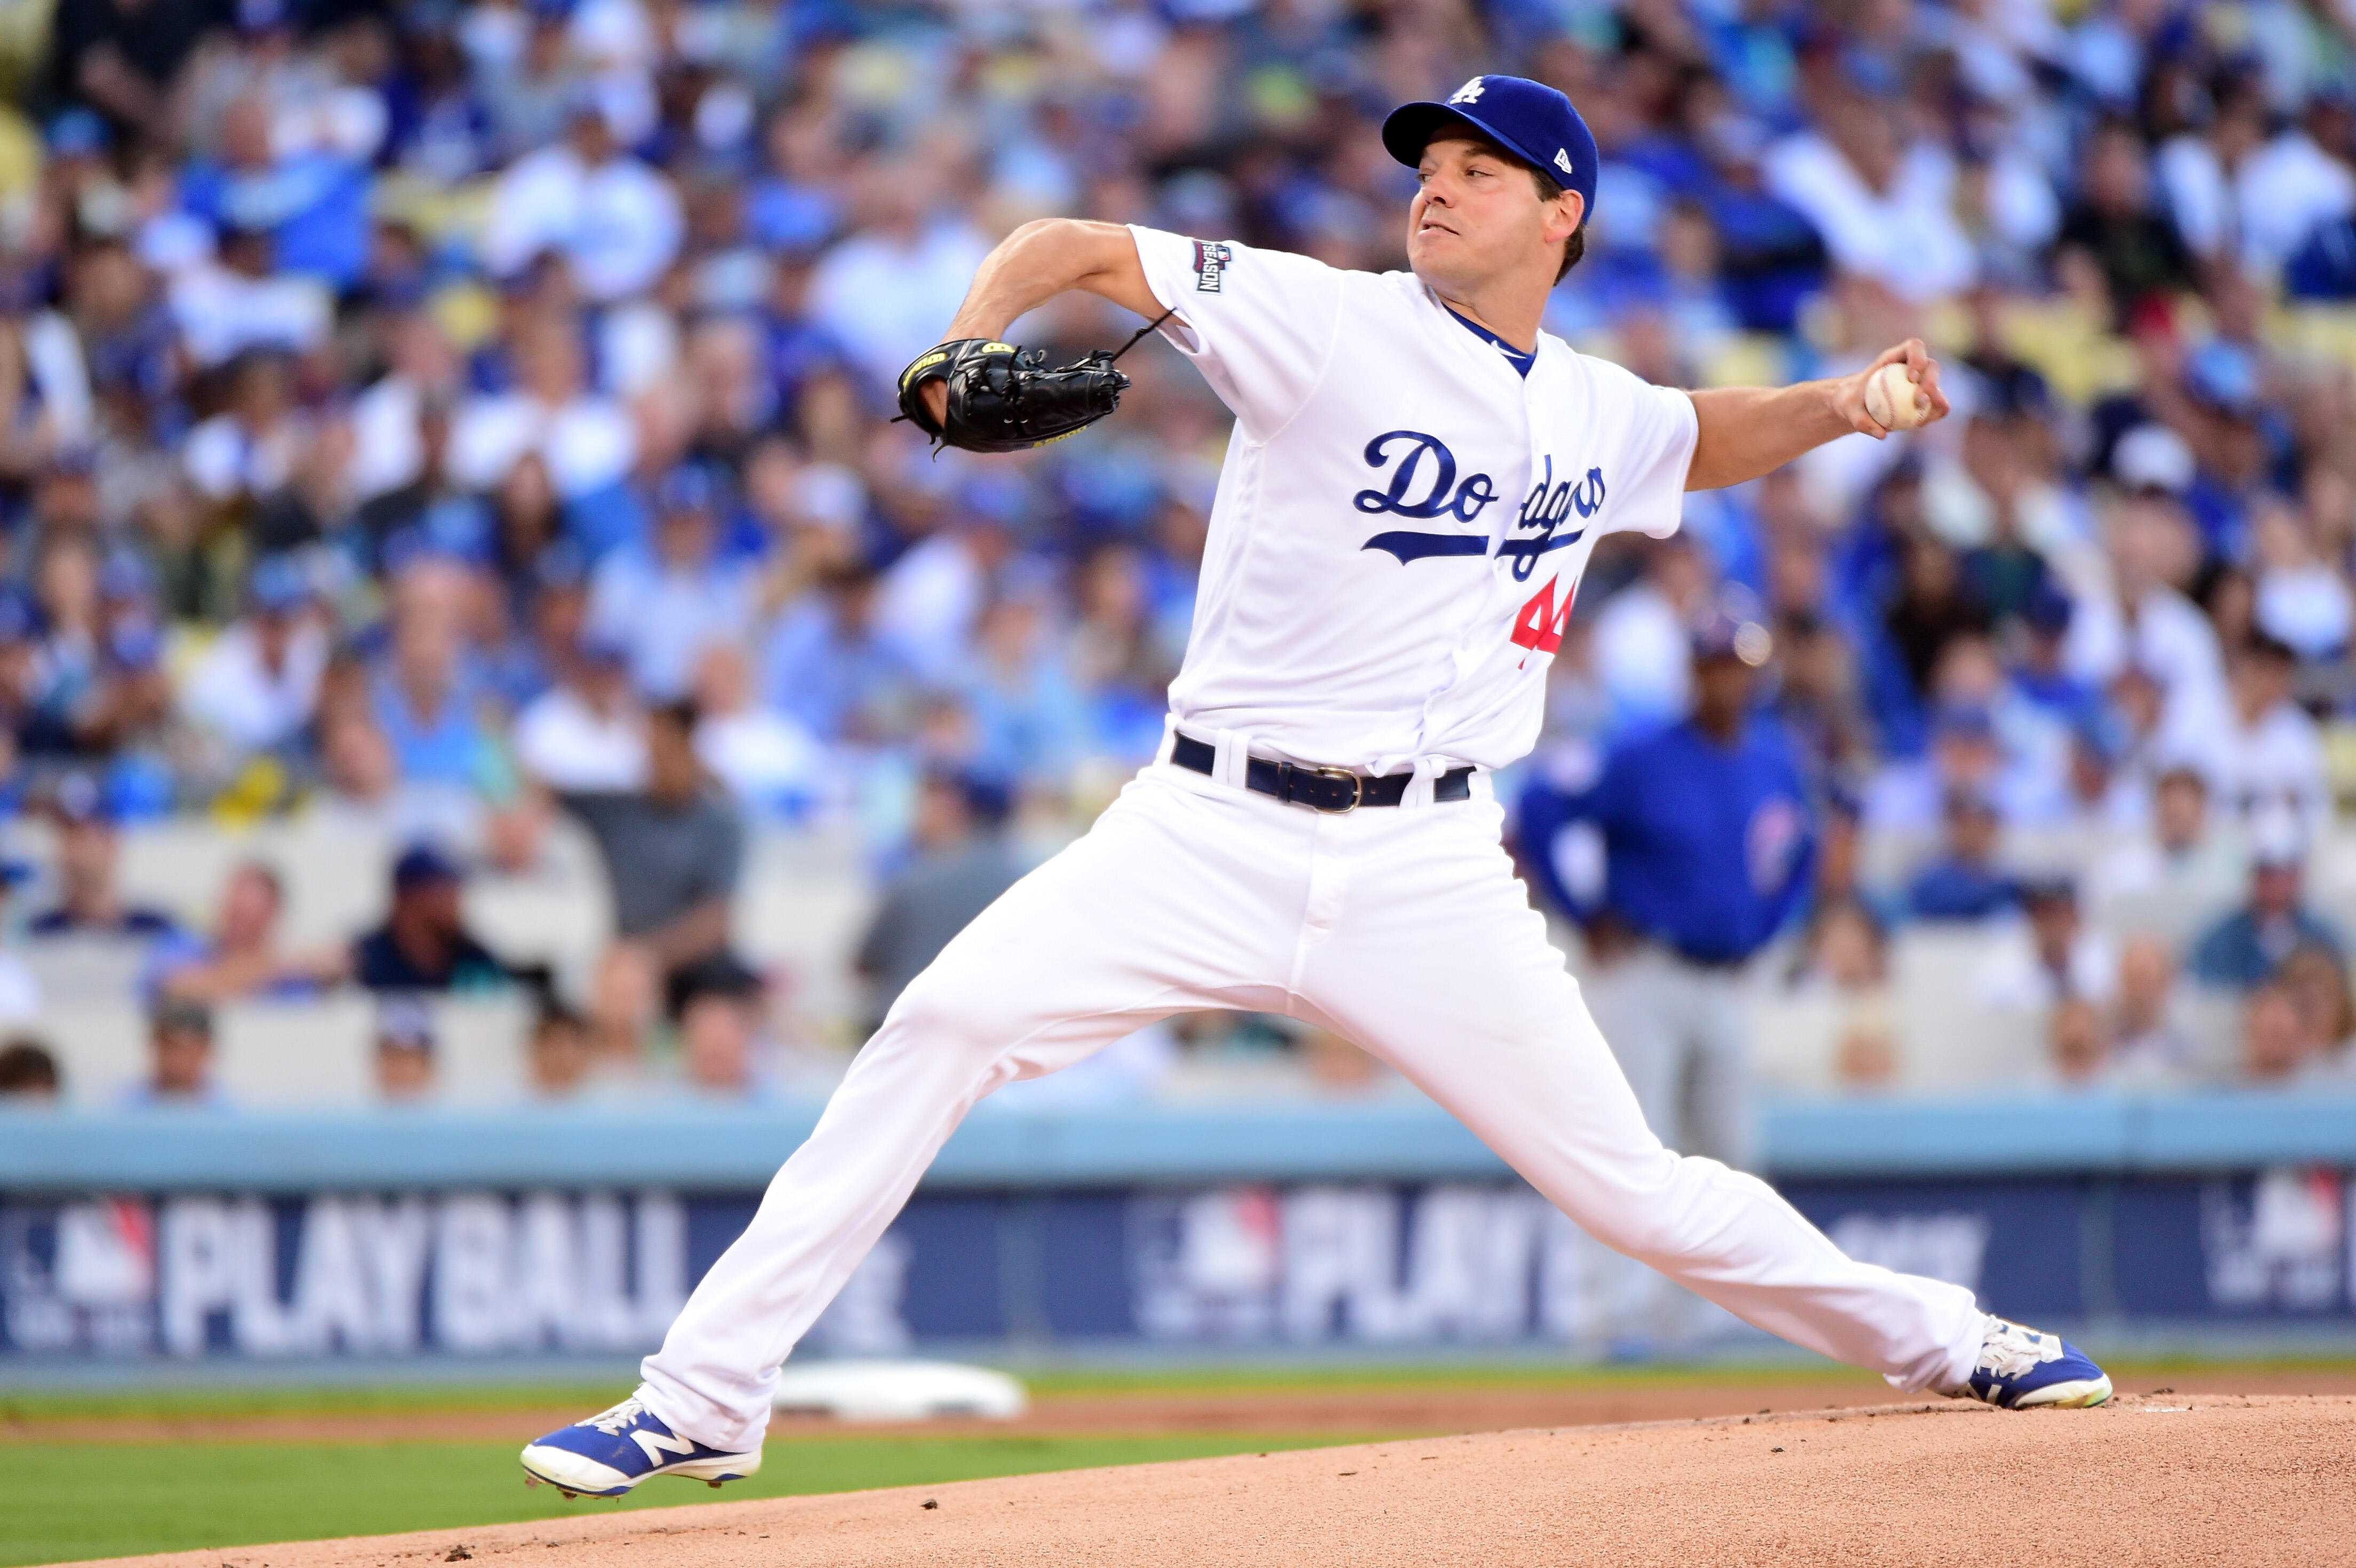 Rich Hill Changing Warm Up Routine To Produce "Quality" Pitches - Thumbnail Image